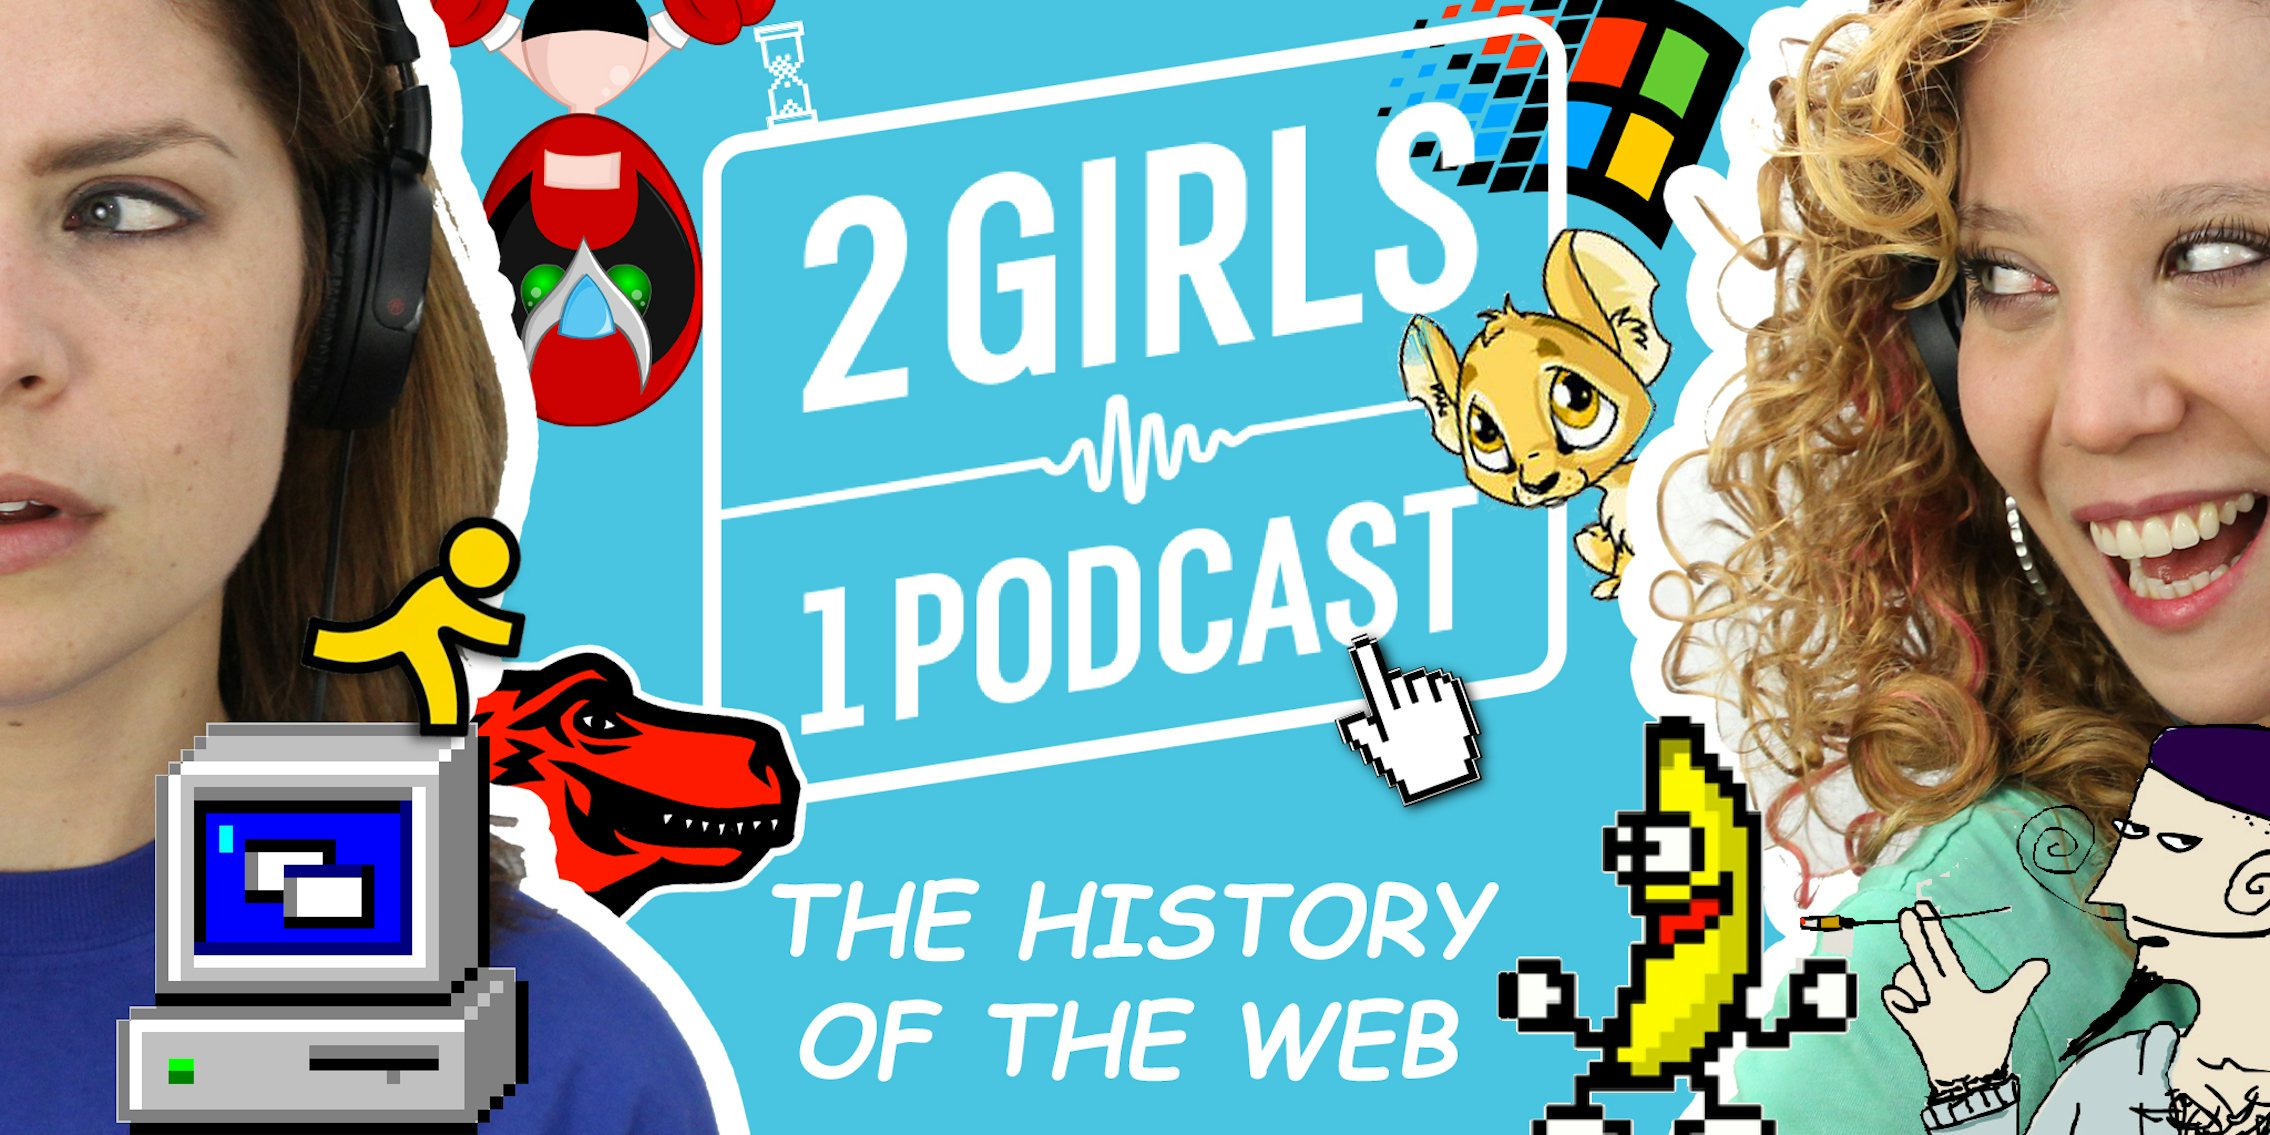 2 Girls 1 Podcast HISTORY OF THE WEB